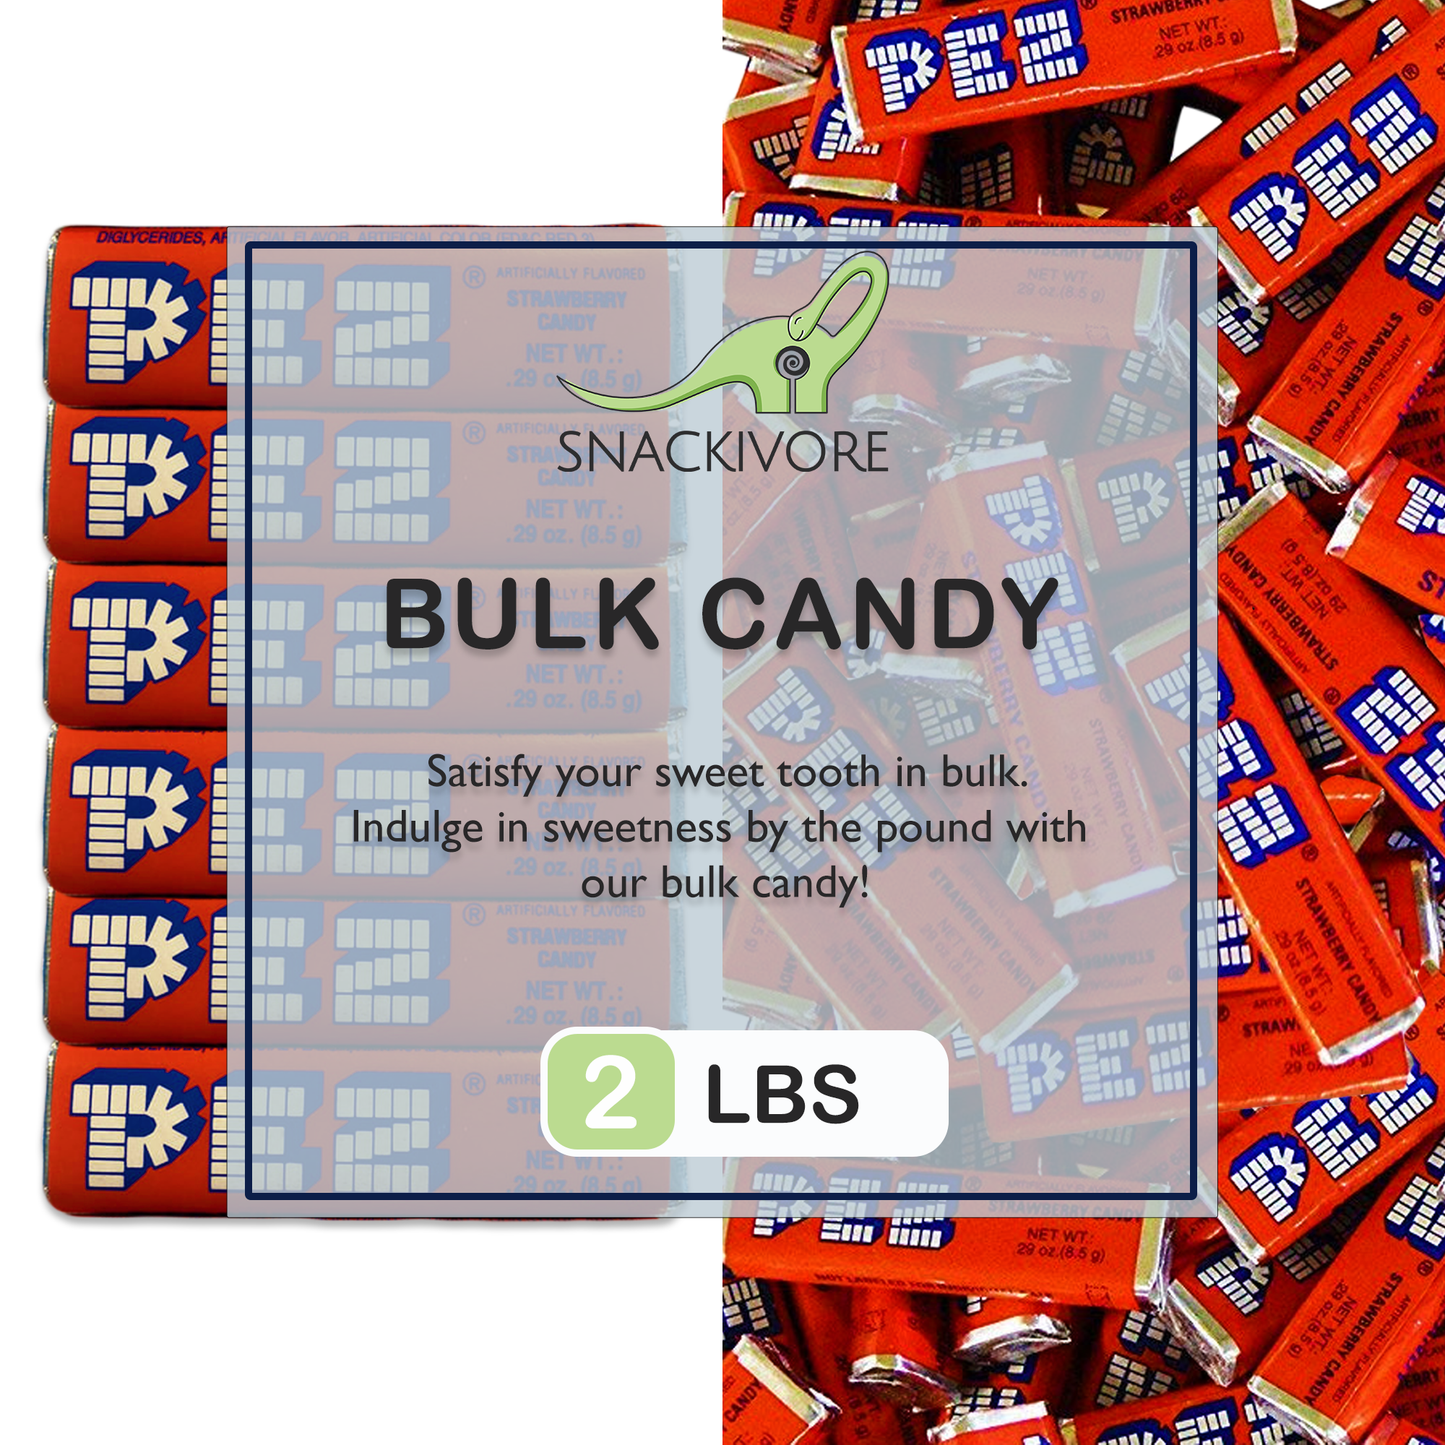 Pez Candy Refill, Strawberry Pez Candy Bulk 2LB Bag of Strawberry Pez Refill Rolls by Inspired Candy